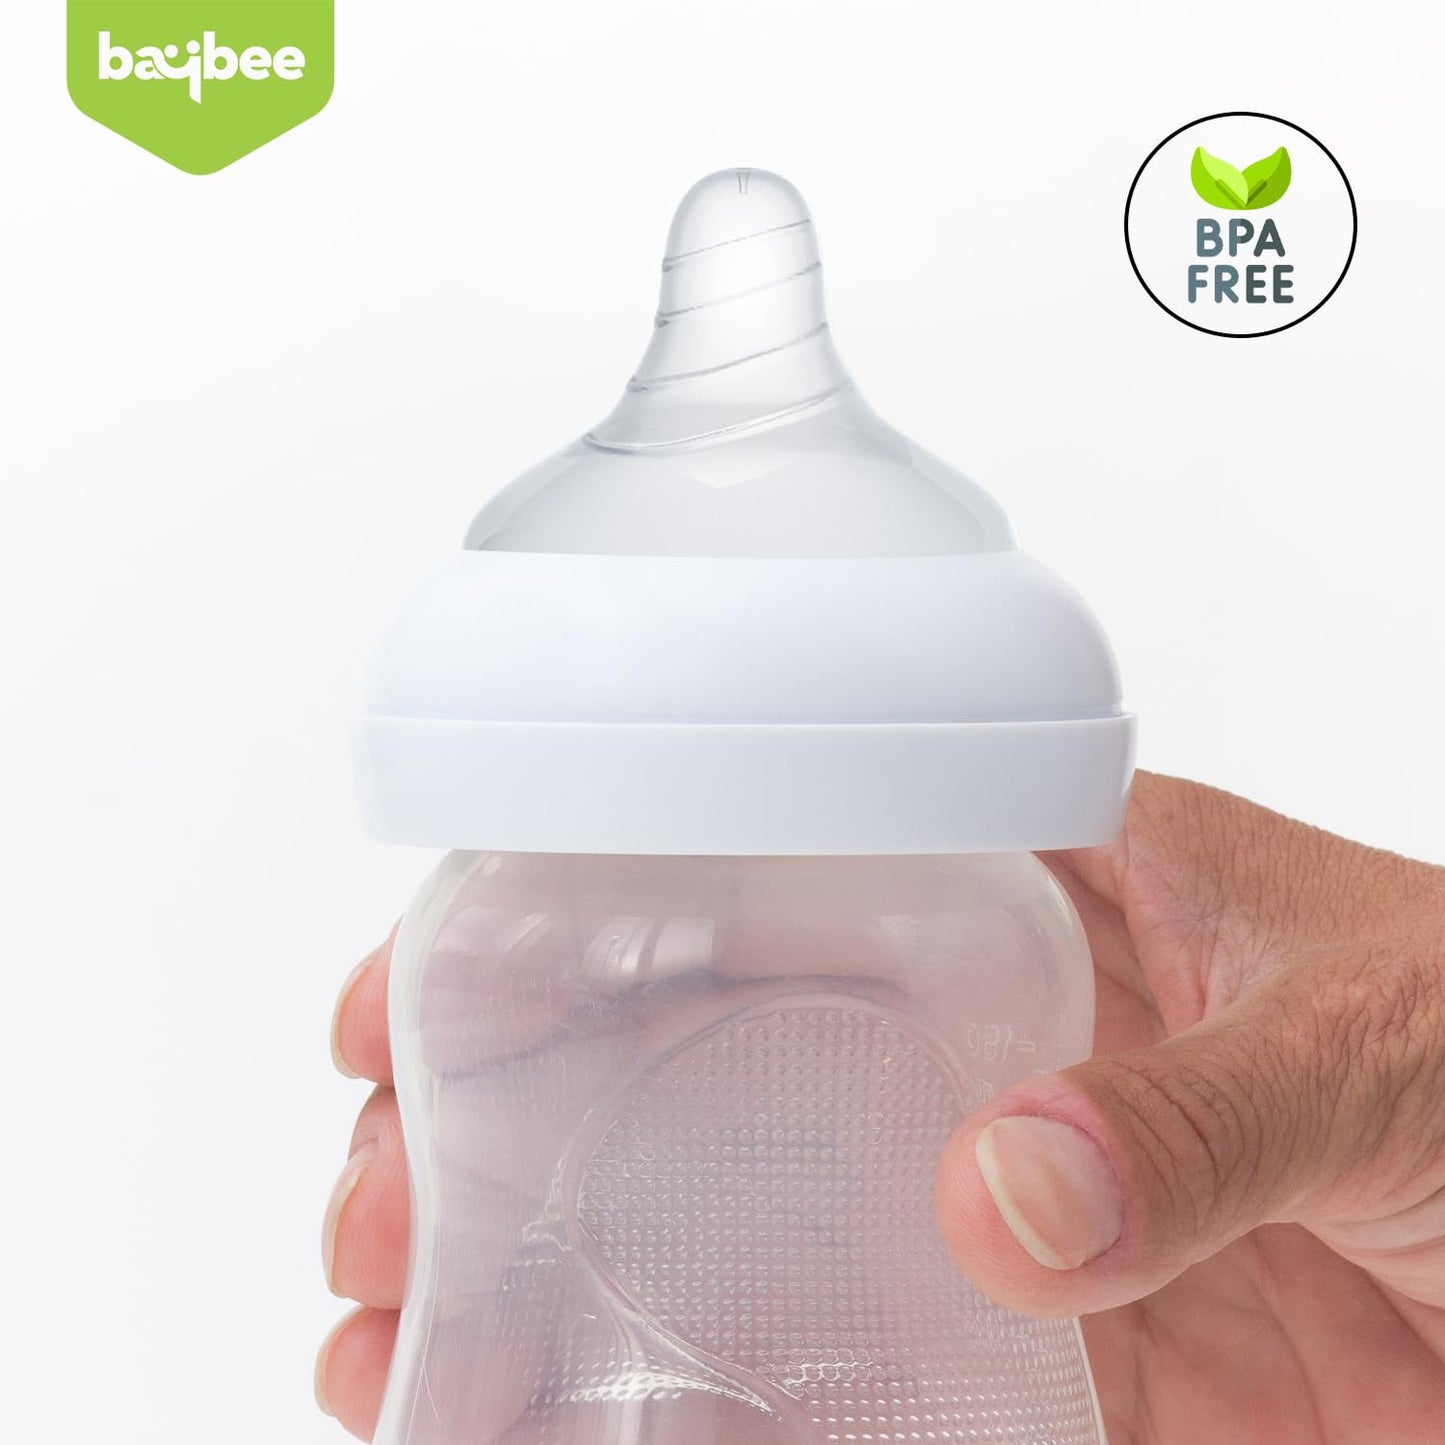 Baybee Wide Neck Baby Bottle Silicone Nipple Natural Flow Rate Feeding Teat/Nipple for Infant, Toddlers, Anti Colic BPA Free Slow Flow New Born Baby Feeding Bottle Nipple 0M+ (Large)